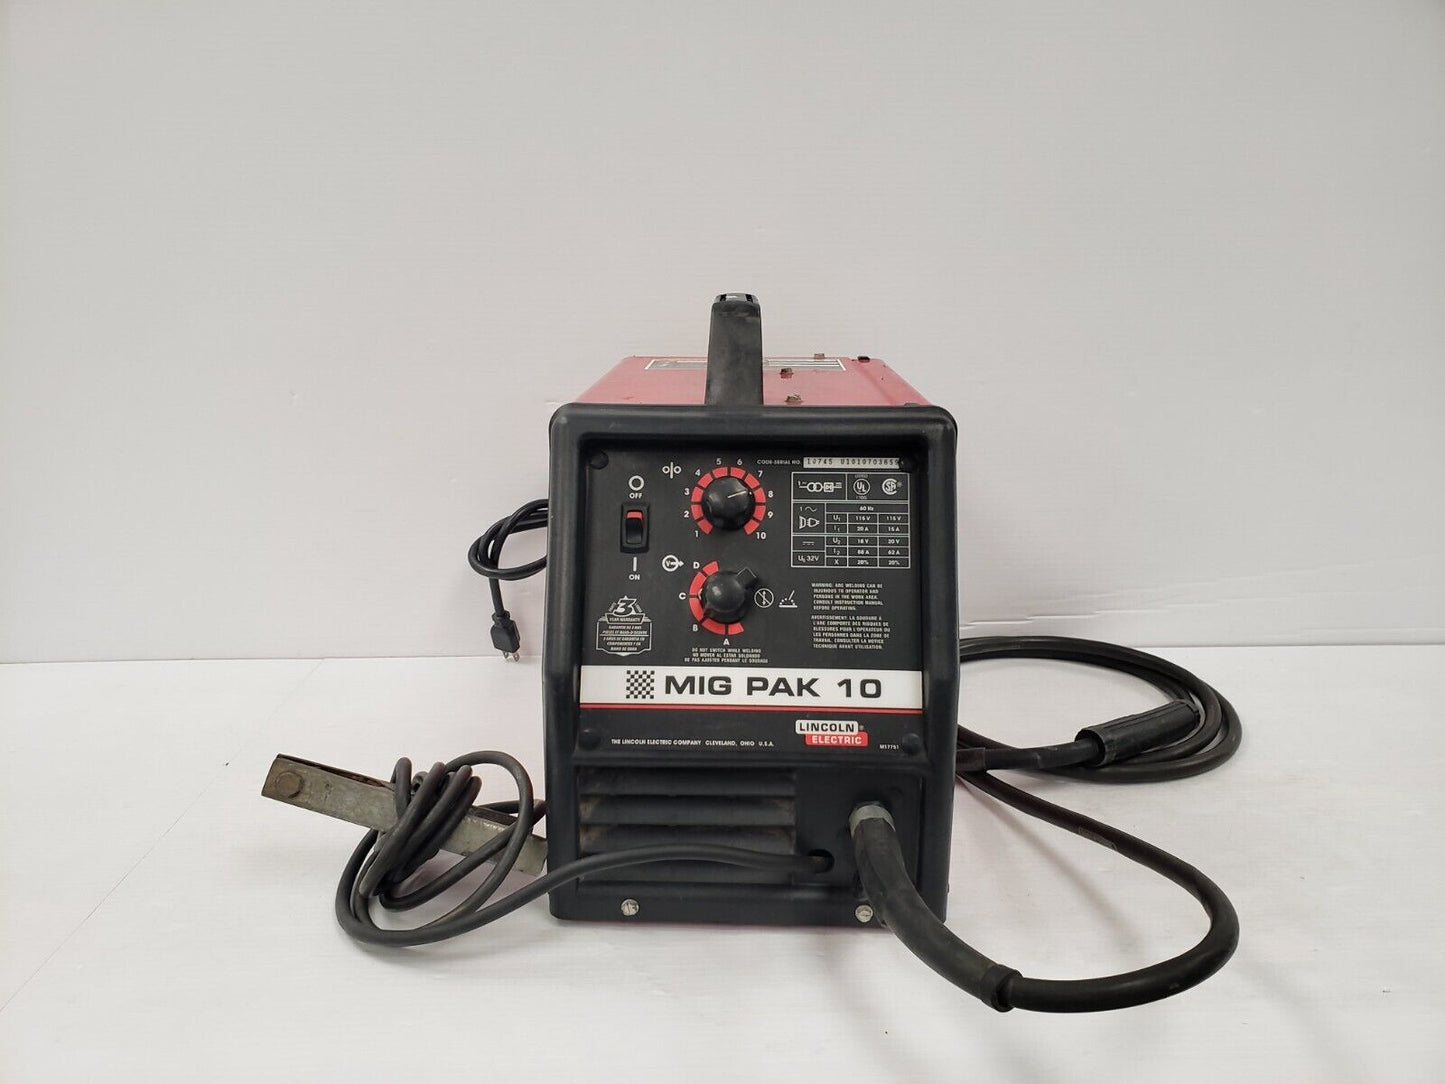 (51953-1) Lincoln Electric M17751 Welder